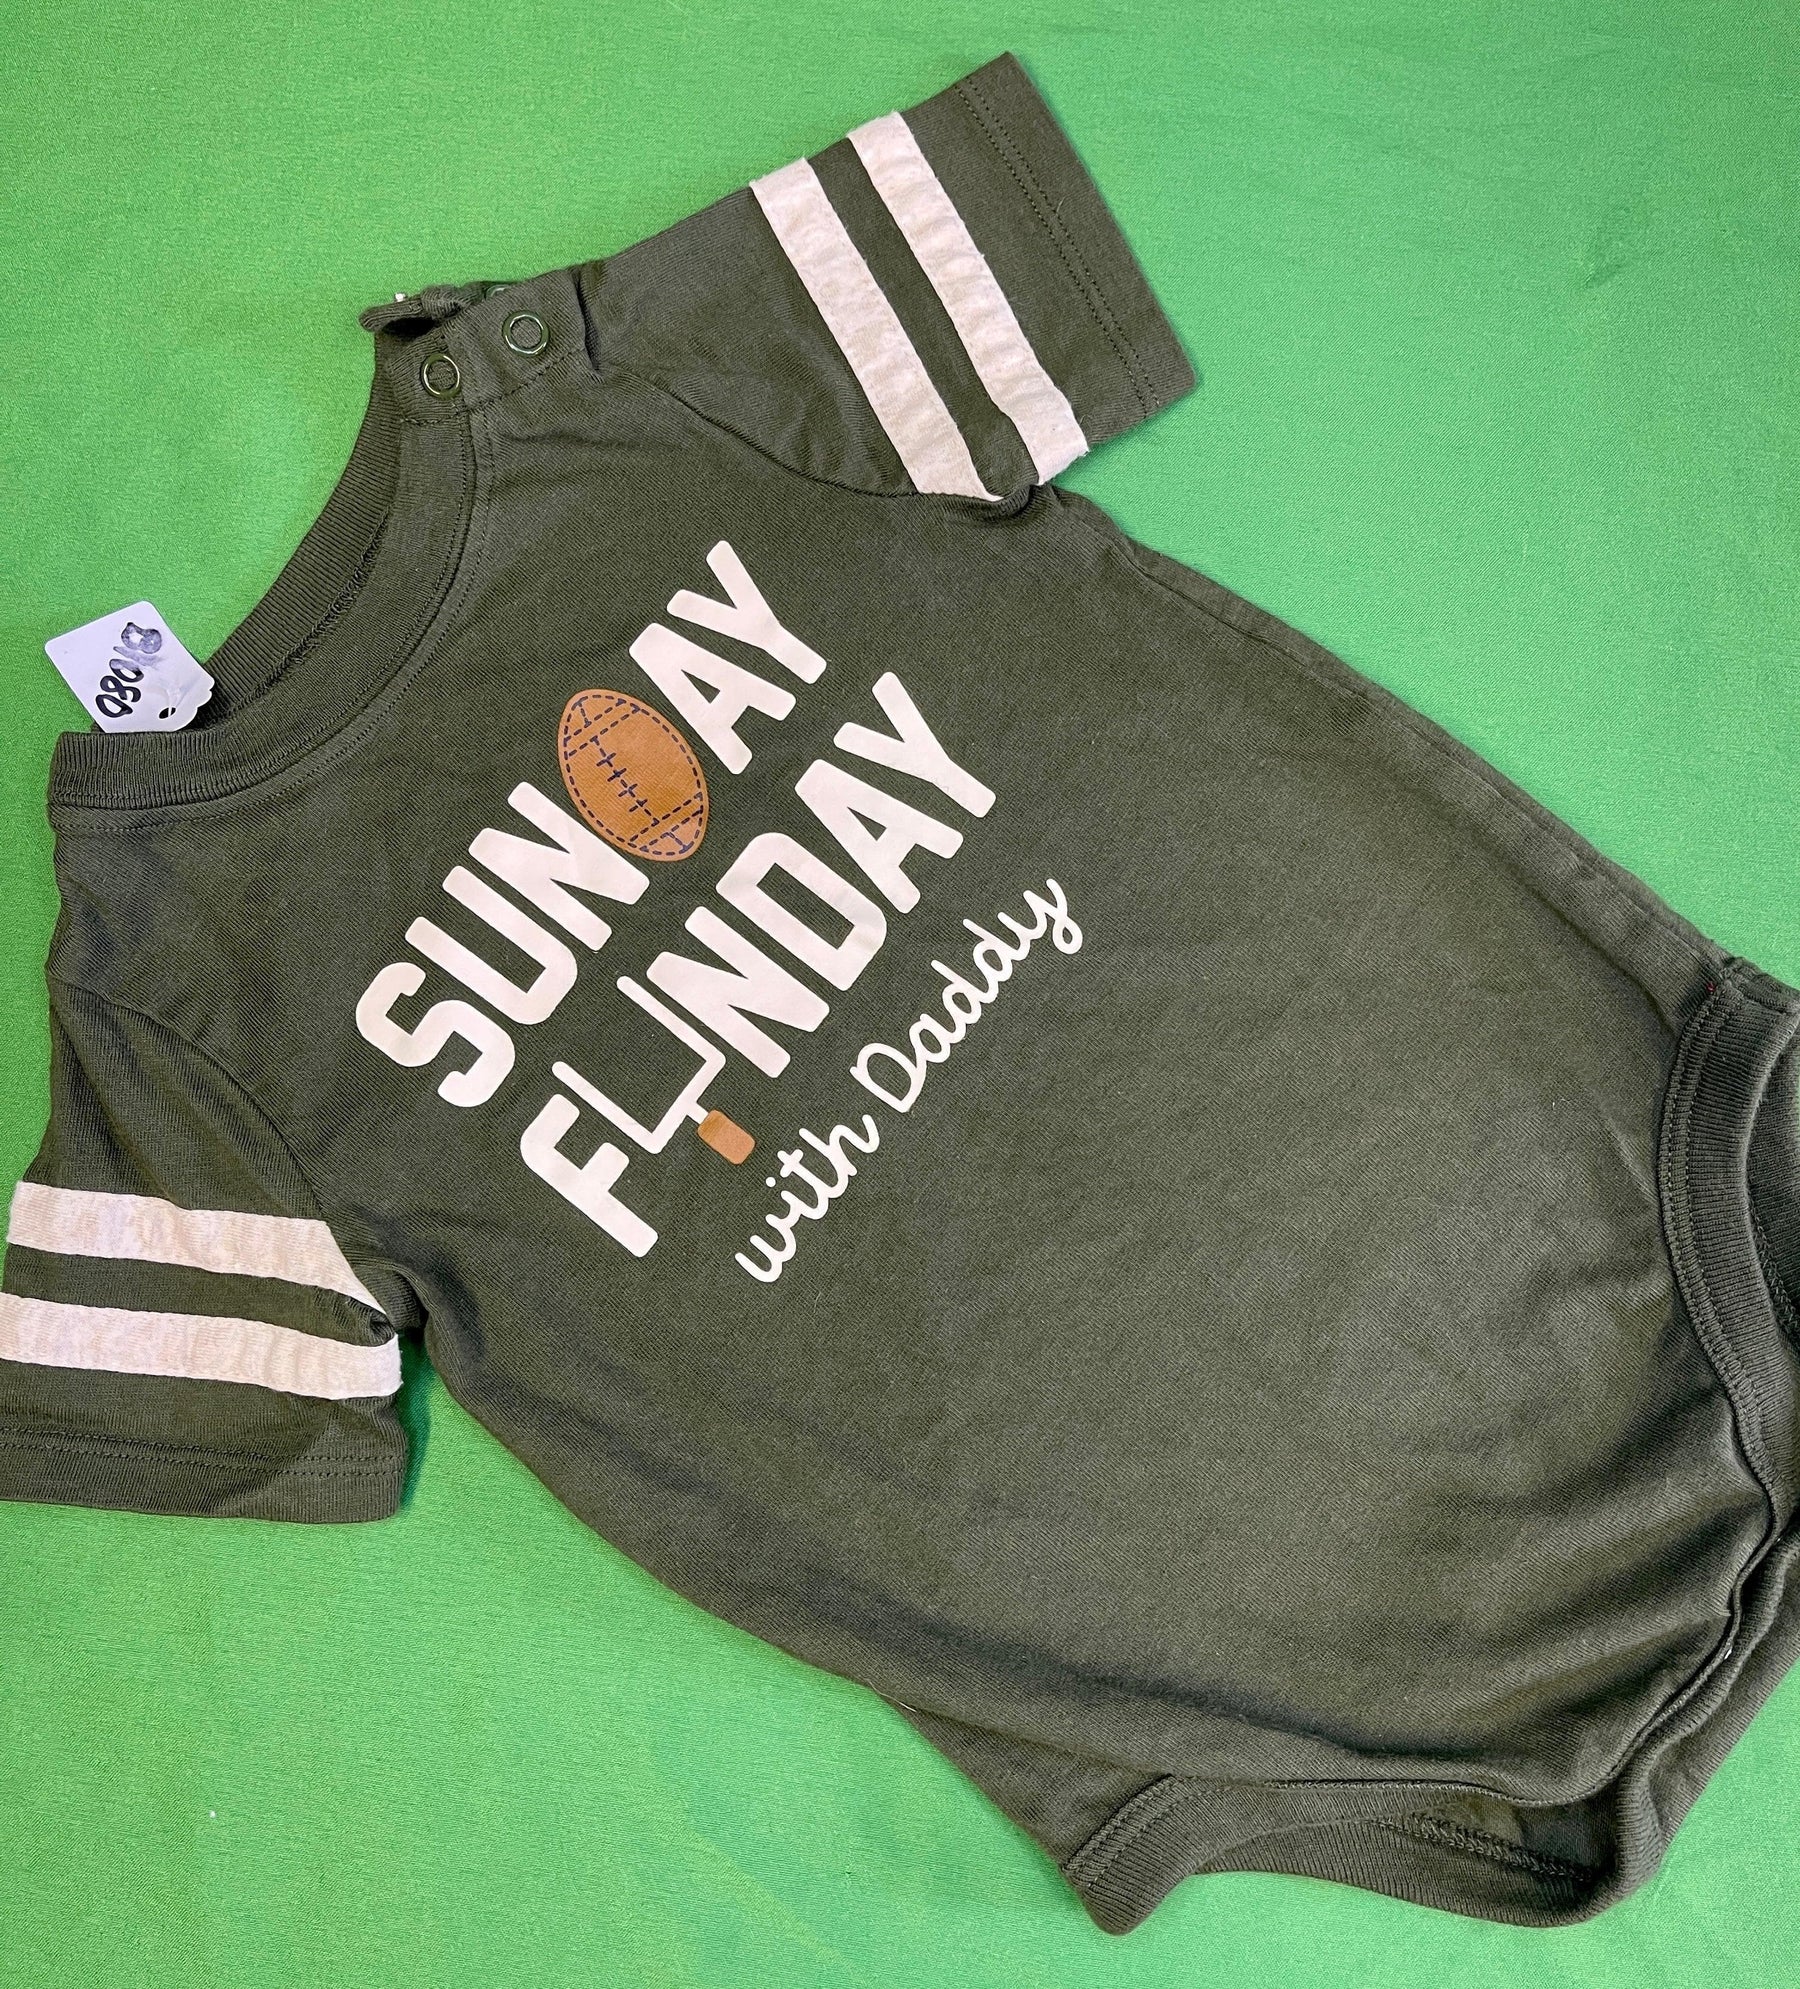 American Football "Sunday Fun Day with Daddy" Bodysuit/Vest 12 Months